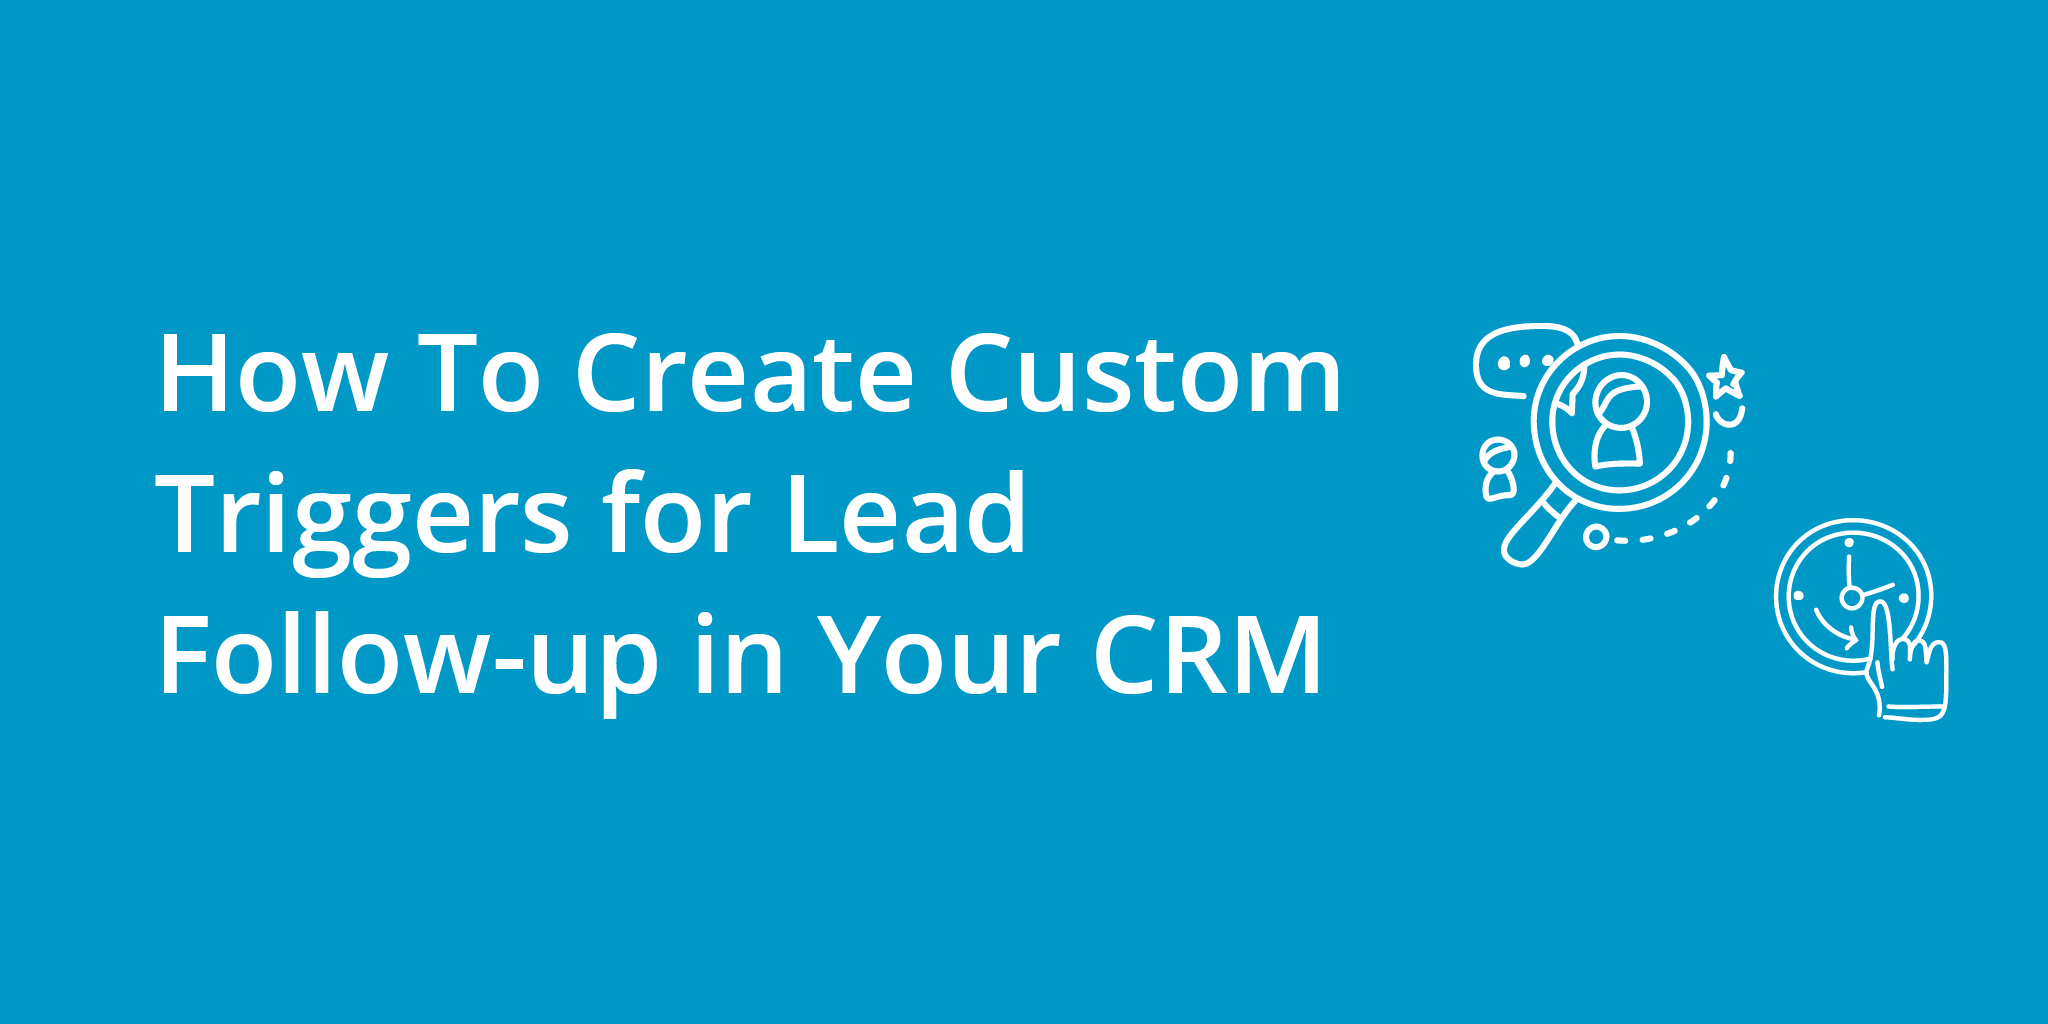 How To Create Custom Triggers for Lead Follow-up in Your CRM